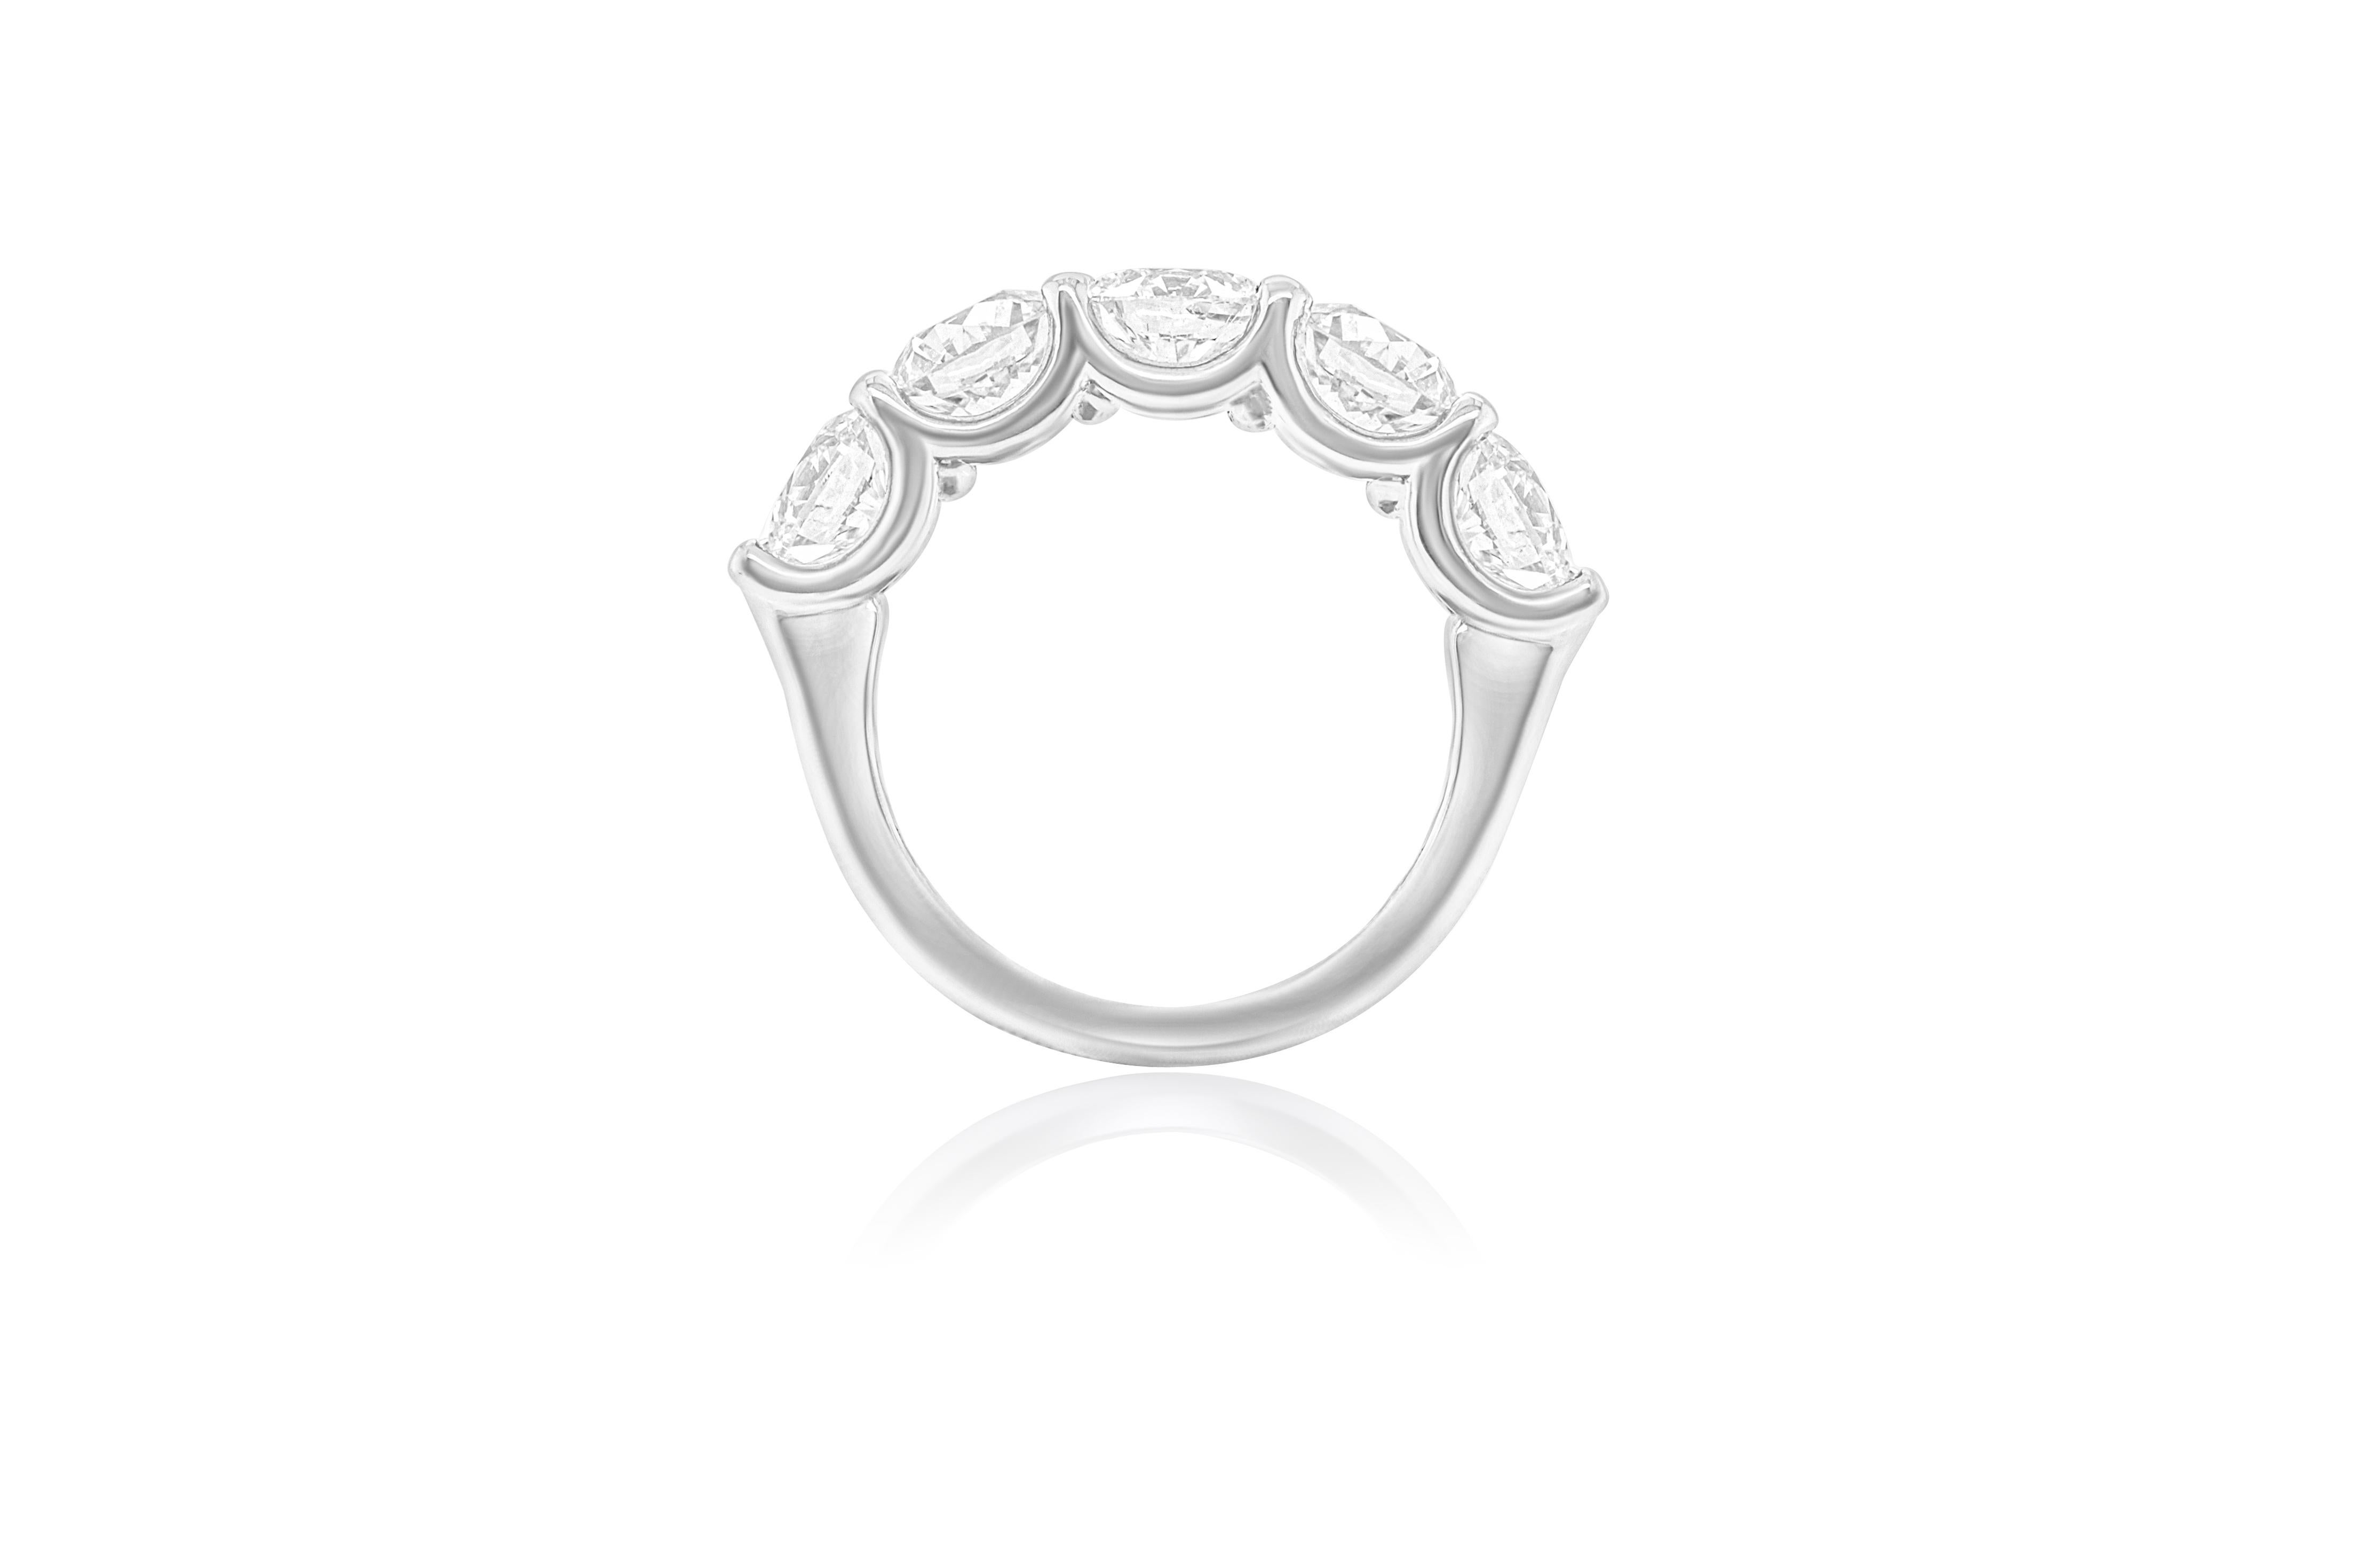 PLATINUM HALF WAY AROUND DIAMOND ETERNITY BAND, FEATURES 3.61CT OF 5 ROUND DIAMONDS.
Diana M. is a leading supplier of top-quality fine jewelry for over 35 years.
Diana M is one-stop shop for all your jewelry shopping, carrying line of diamond